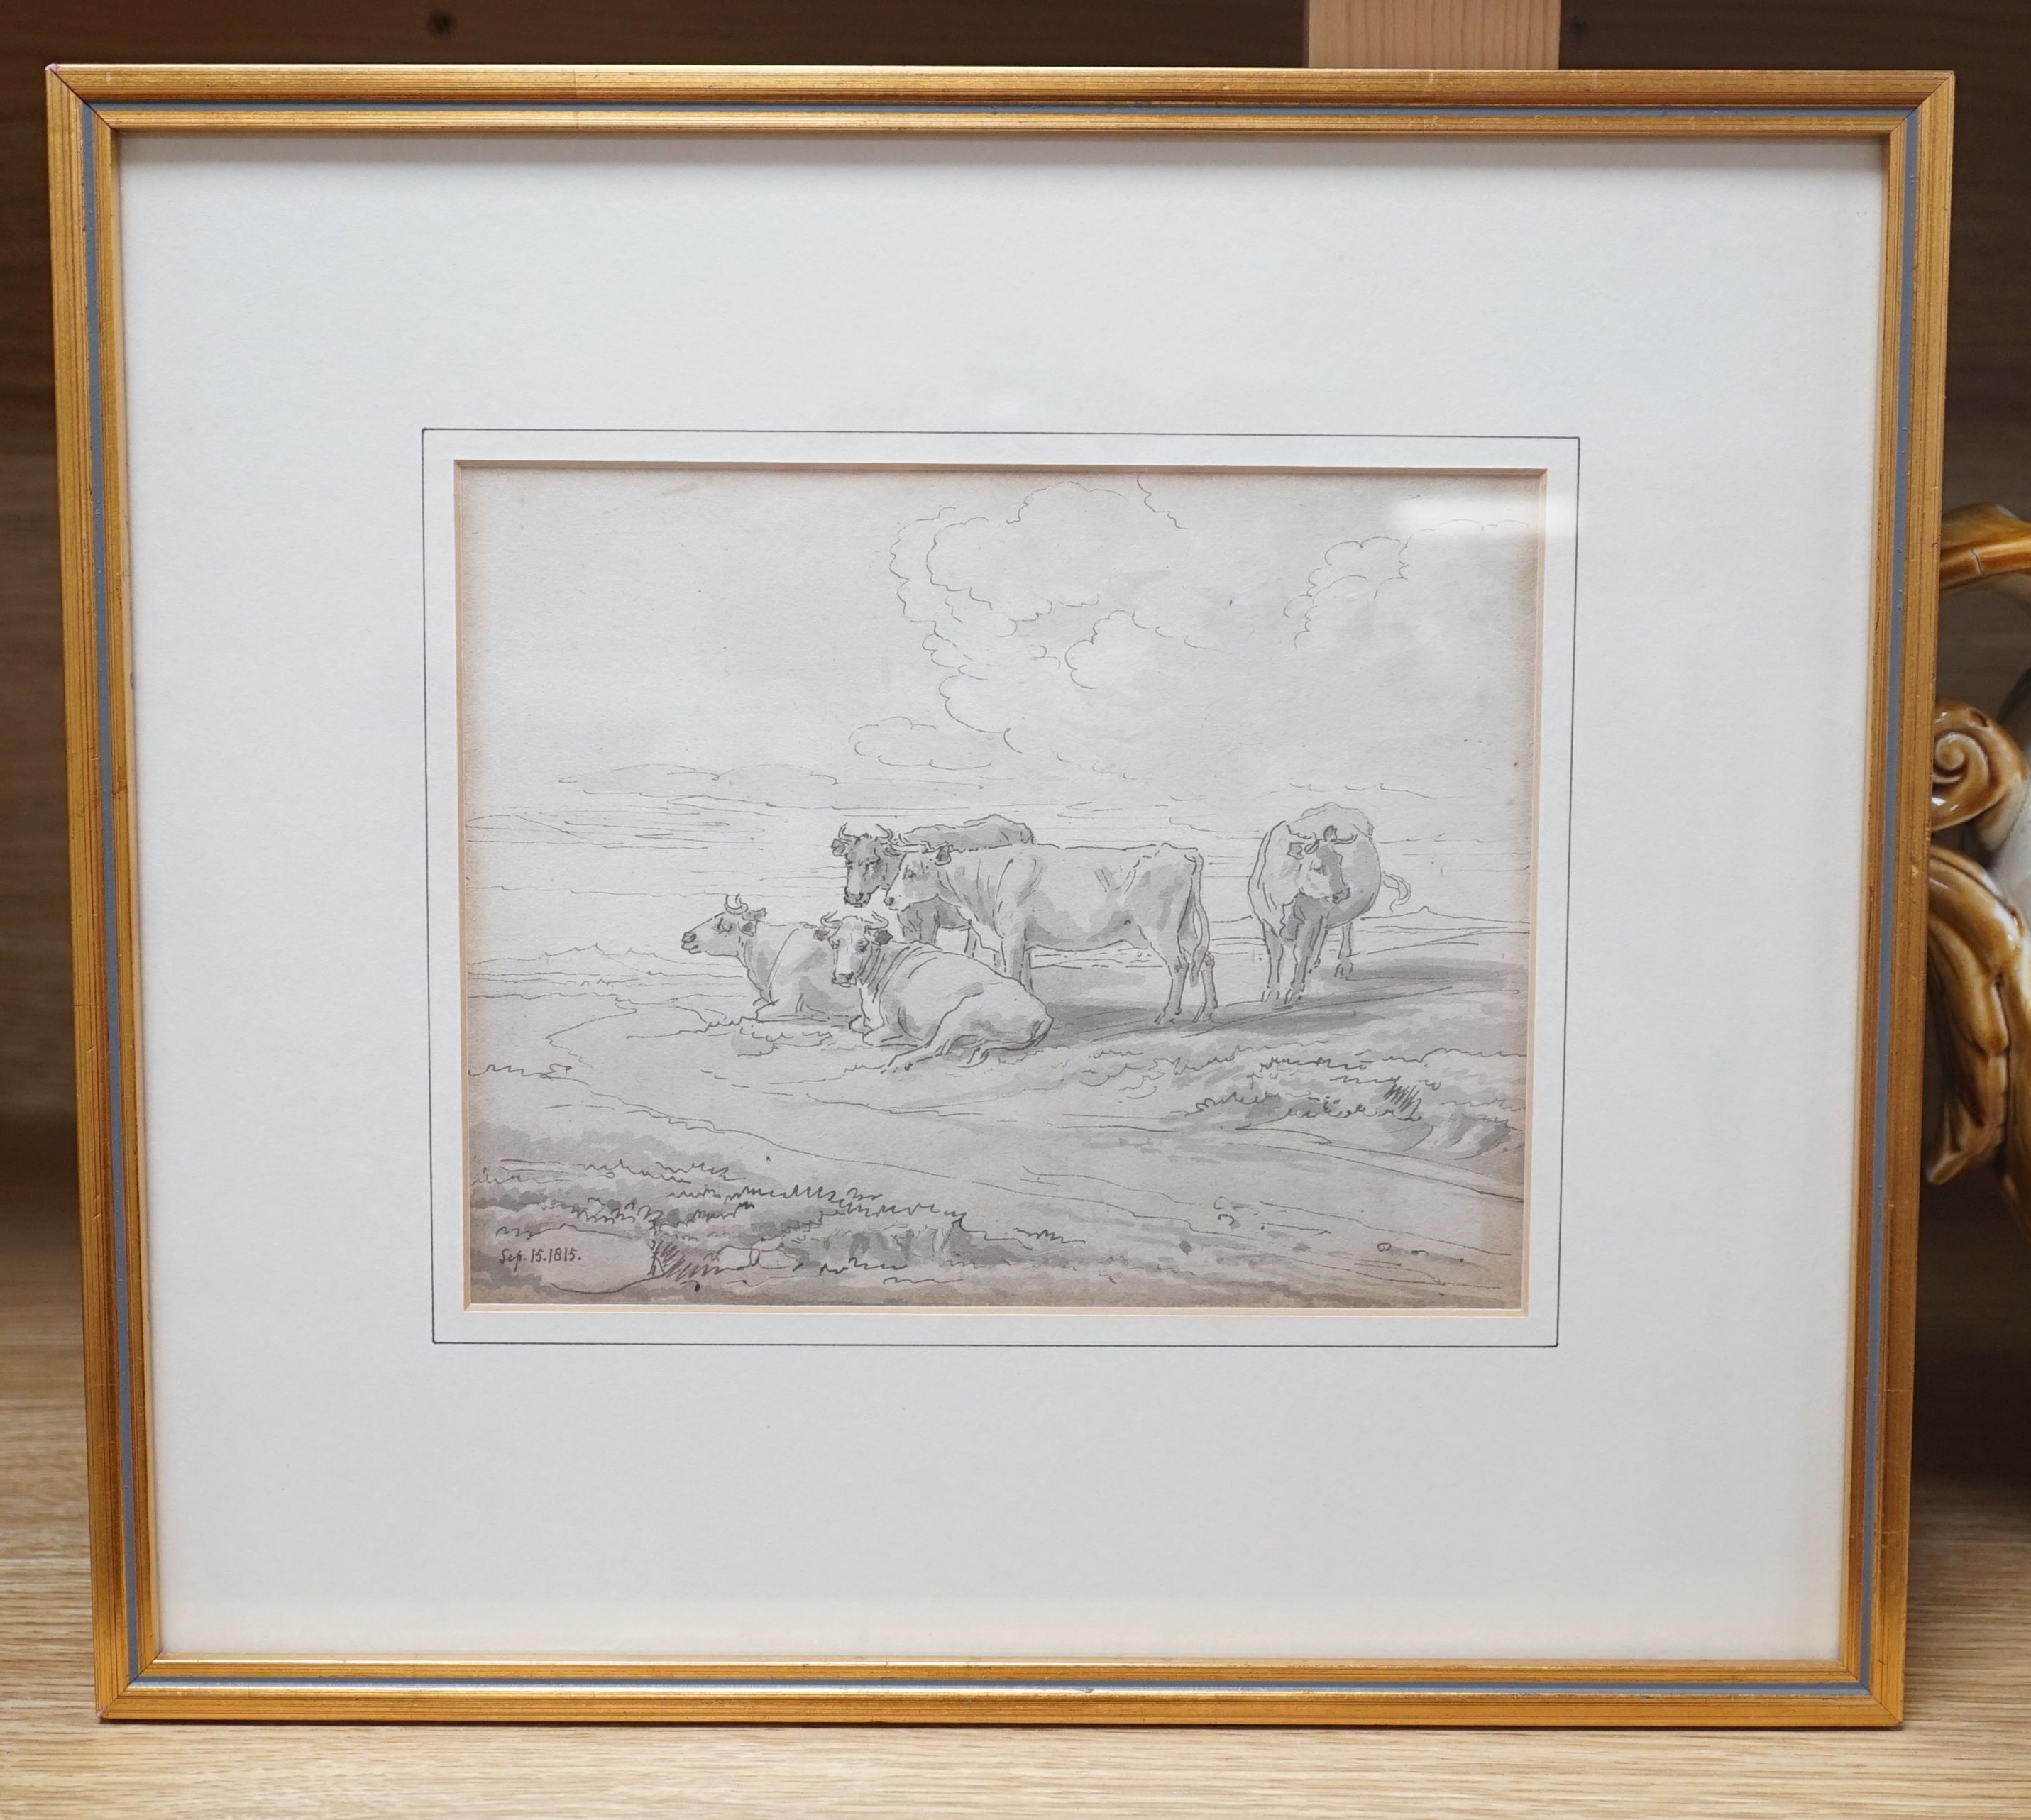 John White Abbott (1763-1851), Cattle resting, pen and wash drawing, inscribed Sep.15.1815, 15 x 19cm